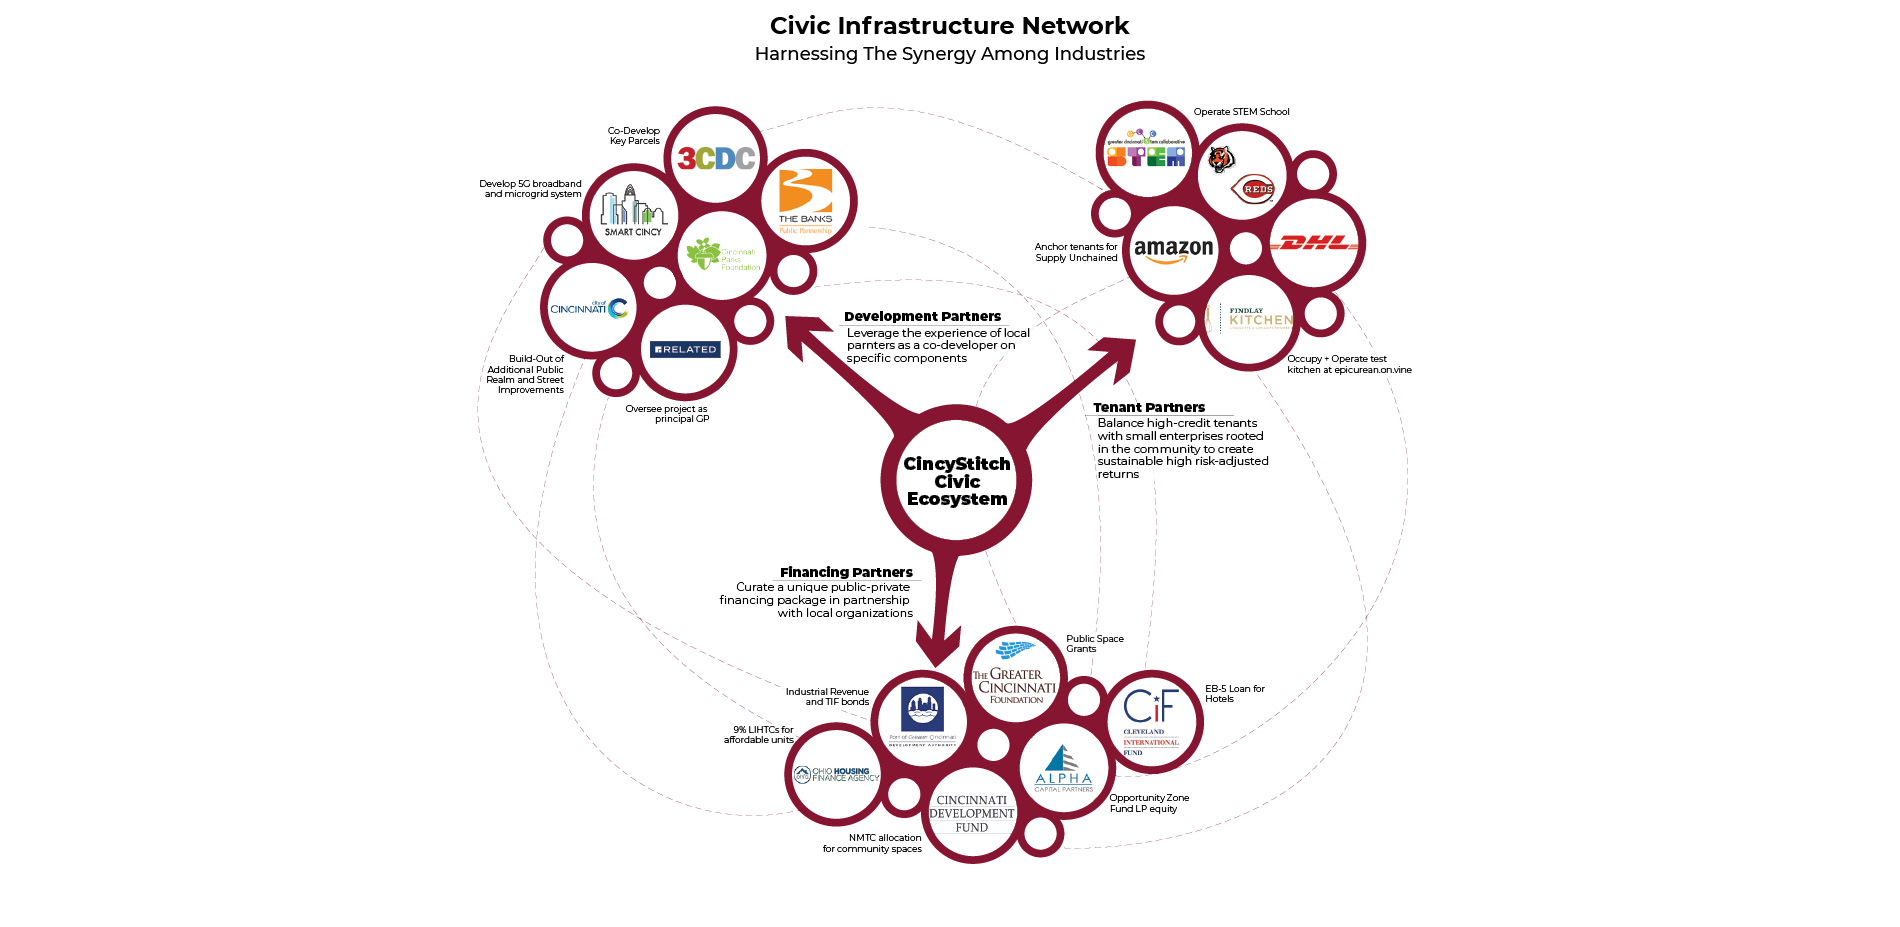 Civic Infrastructure Network